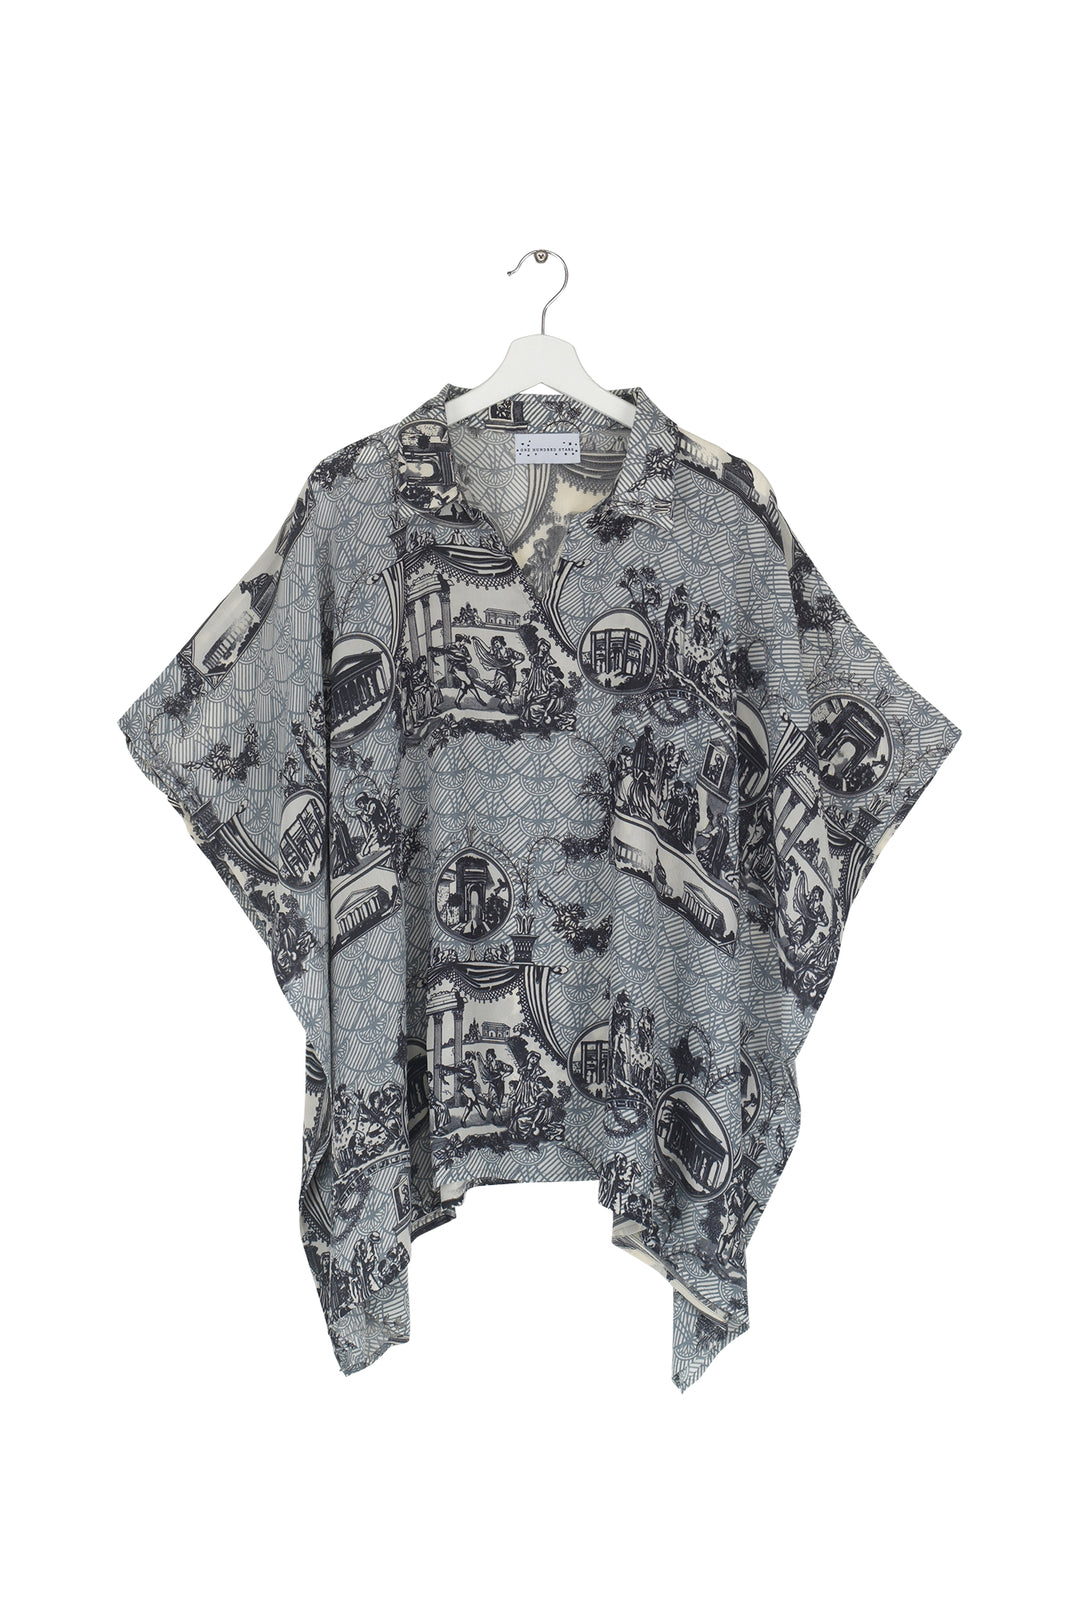 Women's tunic top in ancient columns charcoal print by One Hundred Stars